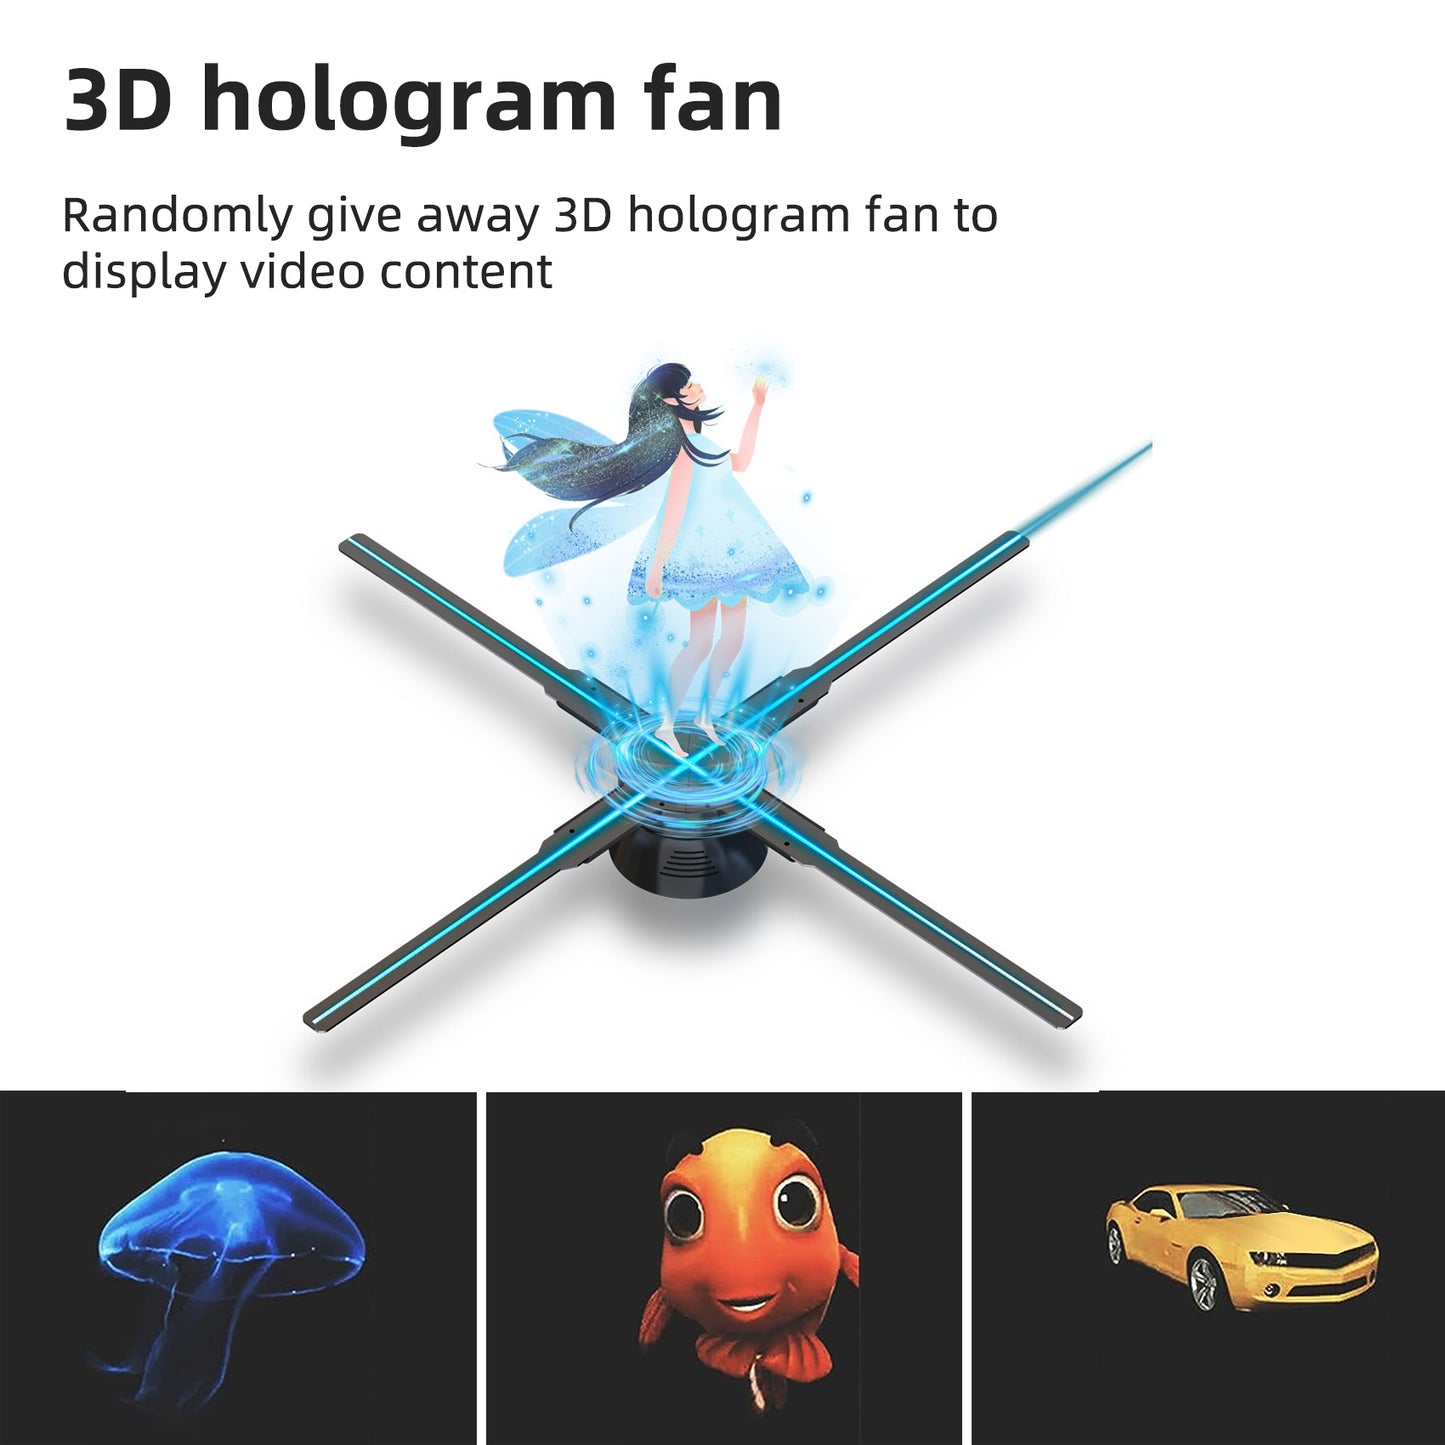 3D Hologram Fan Display with WiFi, Four-Axil Spinning, and High Transfer Speed, Upload by iPhone or Android，31.5 inch 3D Holographic Fan Projector for Shop, Bar